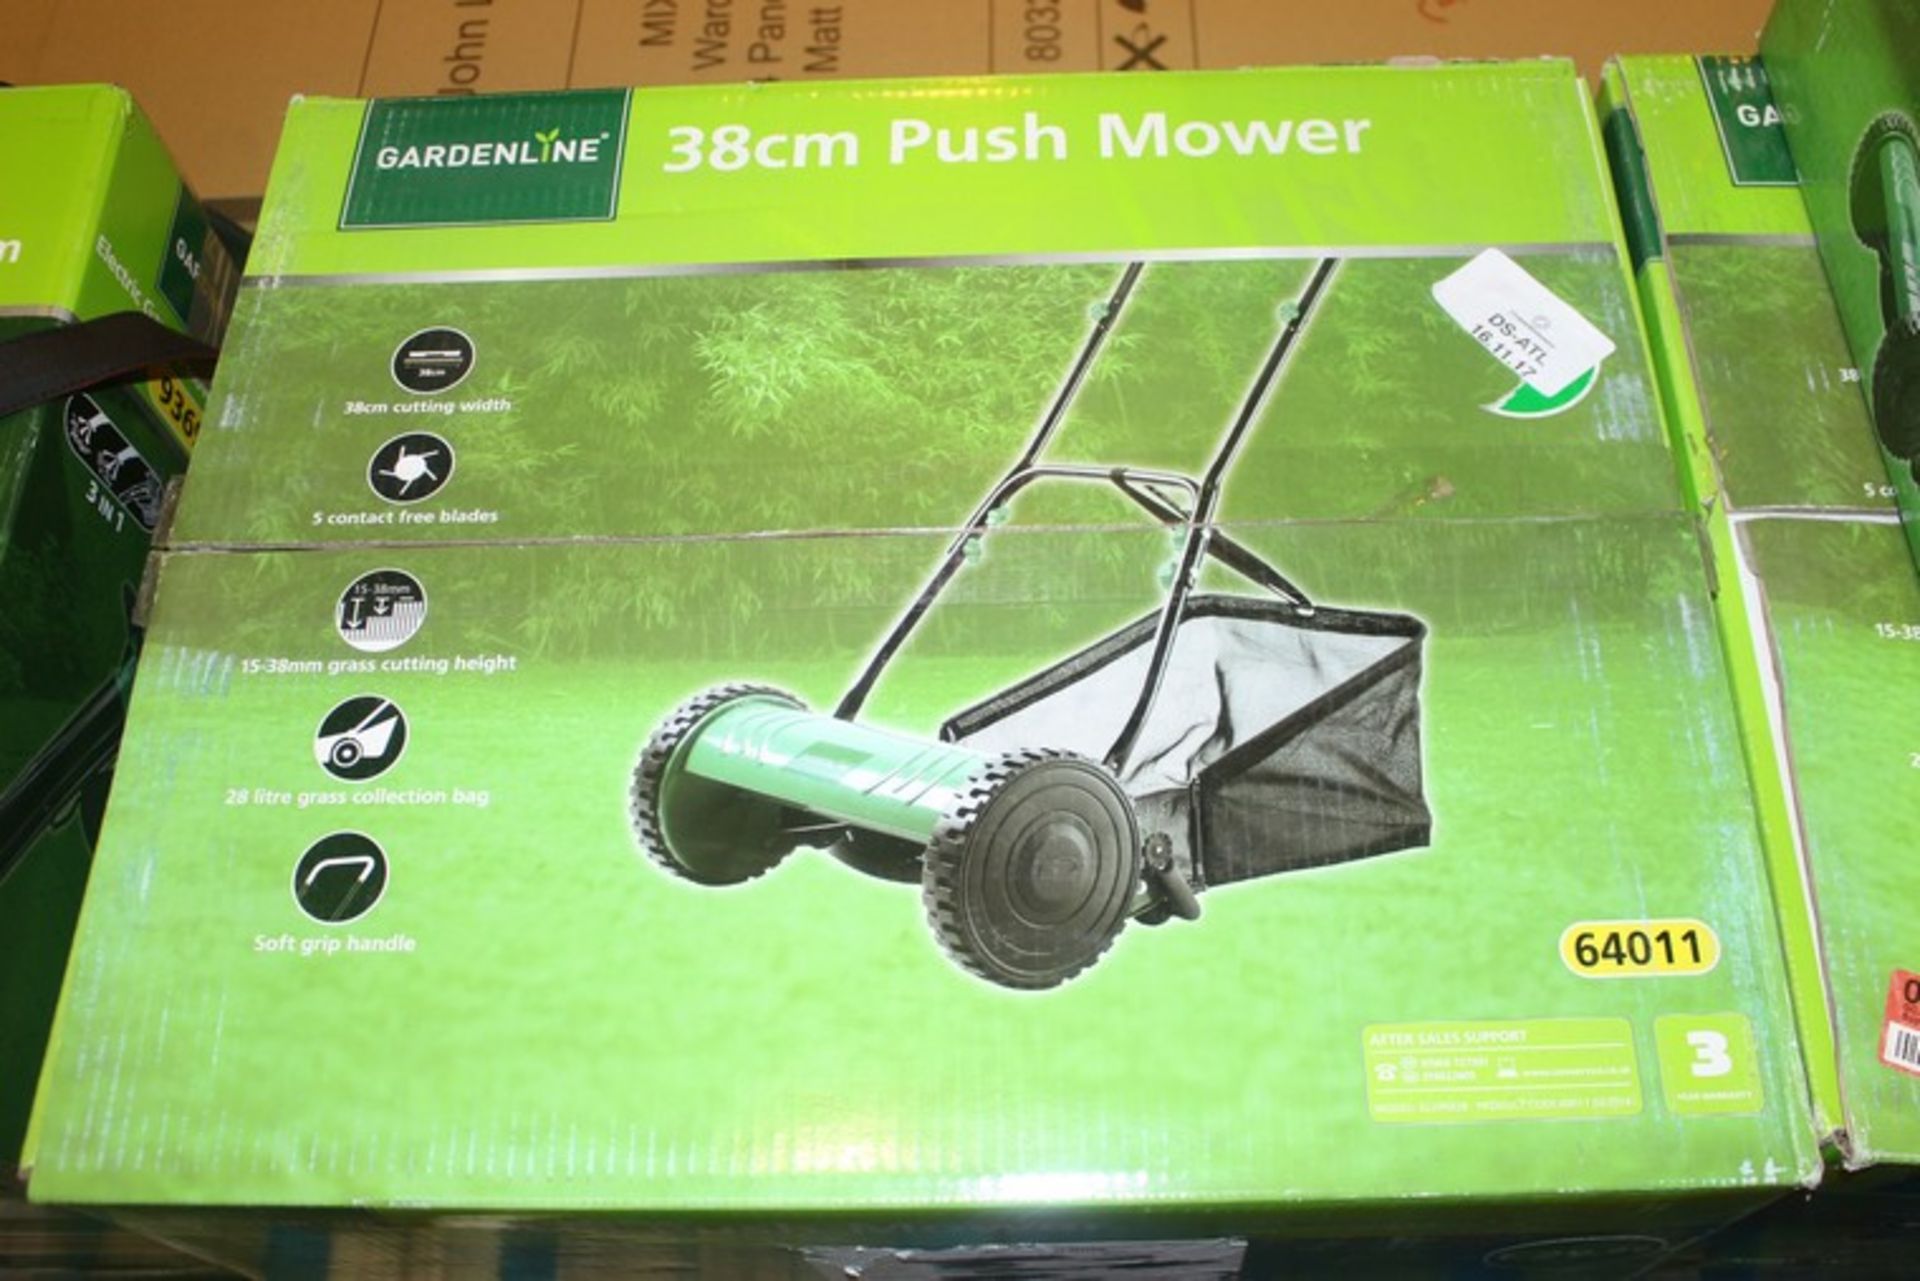 1 x BOXED GARDEN LINE 38CM PUSH MOWER *PLEASE NOTE THAT THE BID PRICE IS MULTIPLIED BY THE NUMBER OF